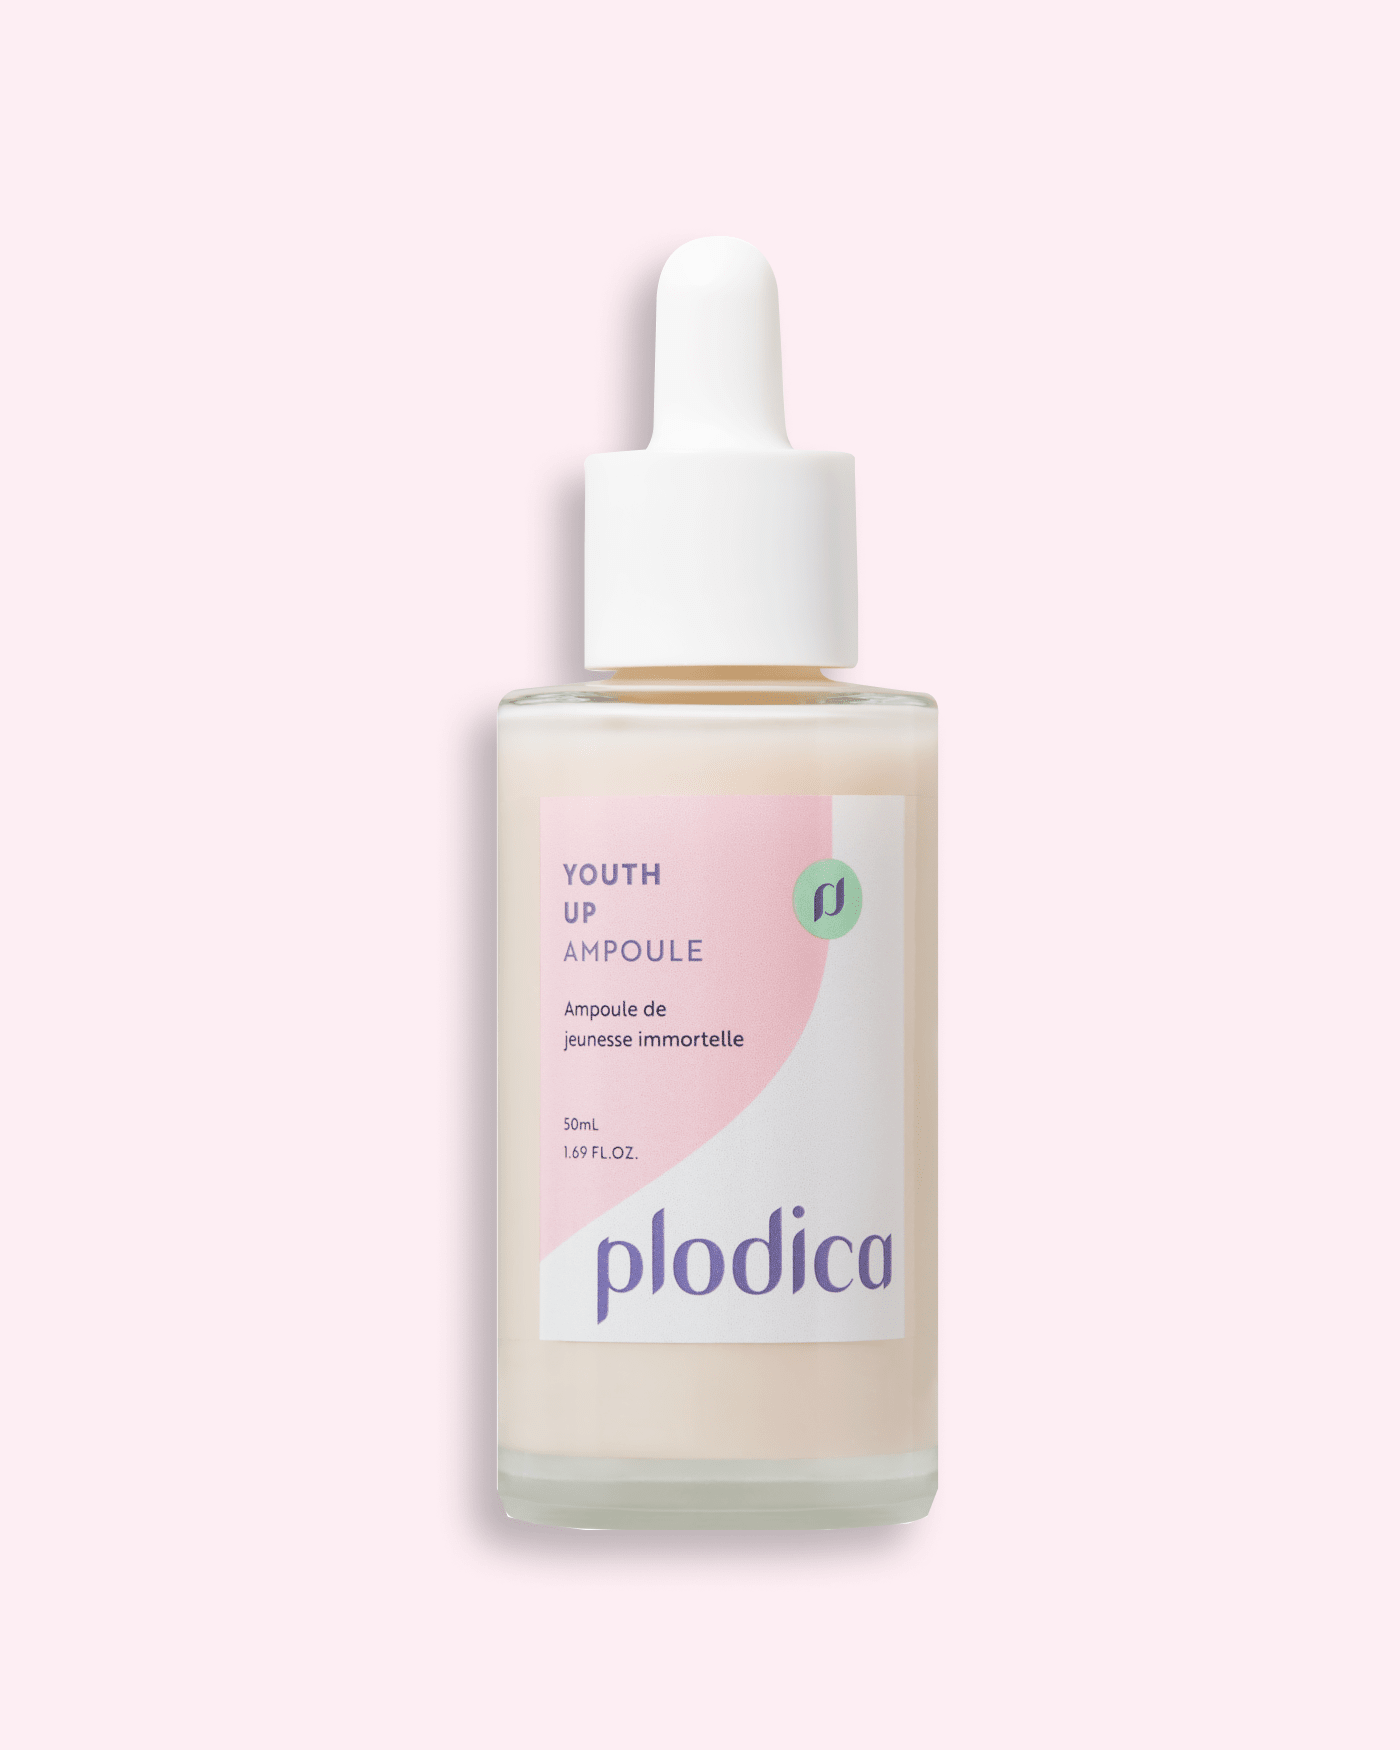 Youth Up Ampolue Serum/Ampoule Plodica 